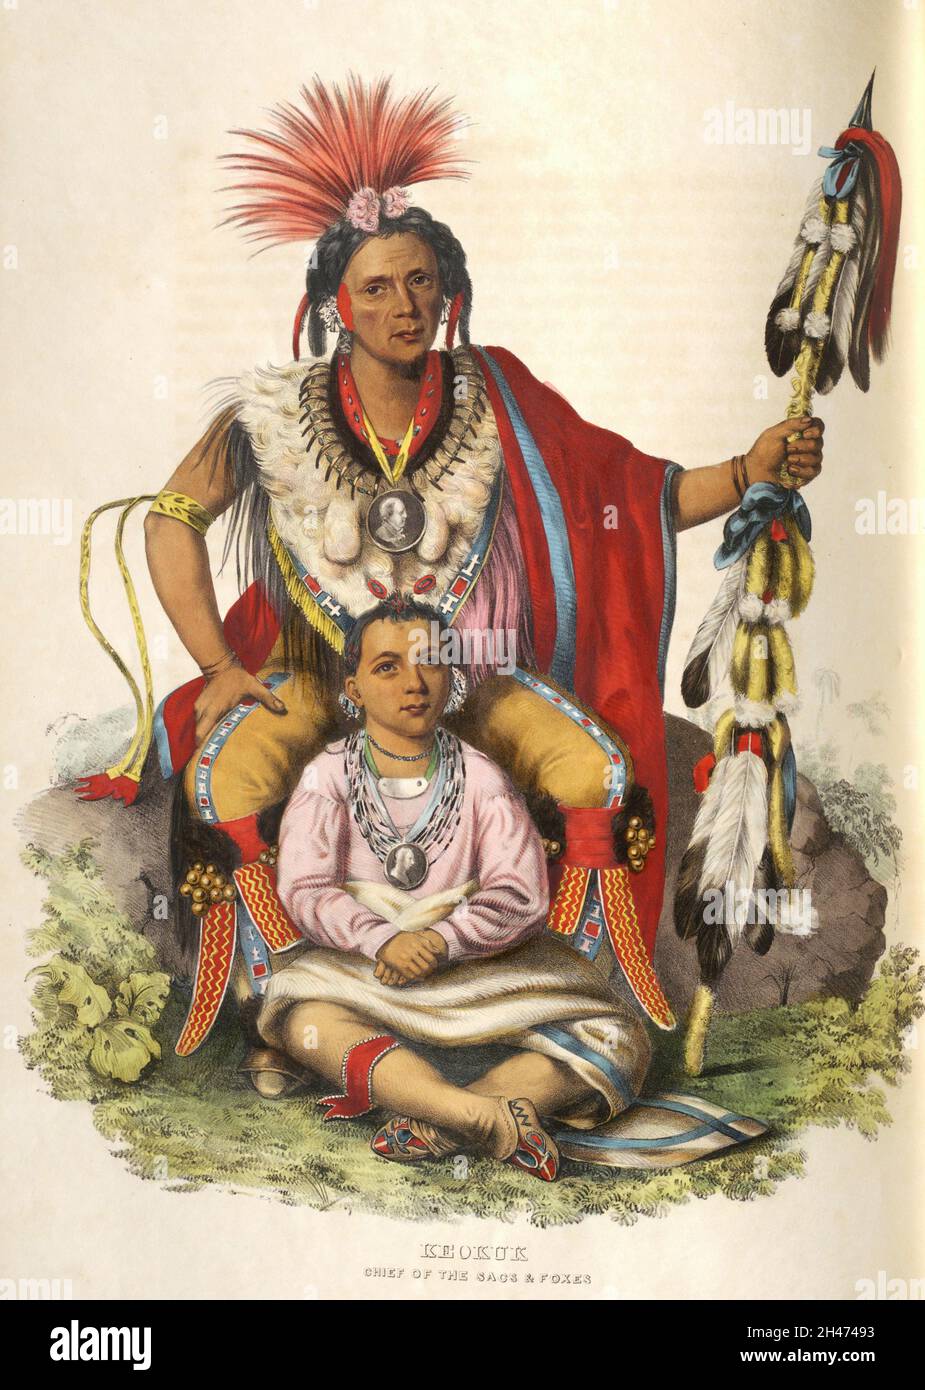 Keokuk (circa 1780–June 1848) was a leader of the Sauk tribe in central North America, and for decades was one of the most recognized Native American leaders and noted for his accommodation with the U.S. government. Keokuk moved his tribe several times and always acted as an ardent friend of the Americans from the book ' History of the Indian Tribes of North America with biographical sketches and anecdotes of the principal chiefs. ' Volume 2 of 3 by Thomas Loraine, McKenney, and James Hall Esq. Published in 1842 Painted by Charles Bird King Stock Photo